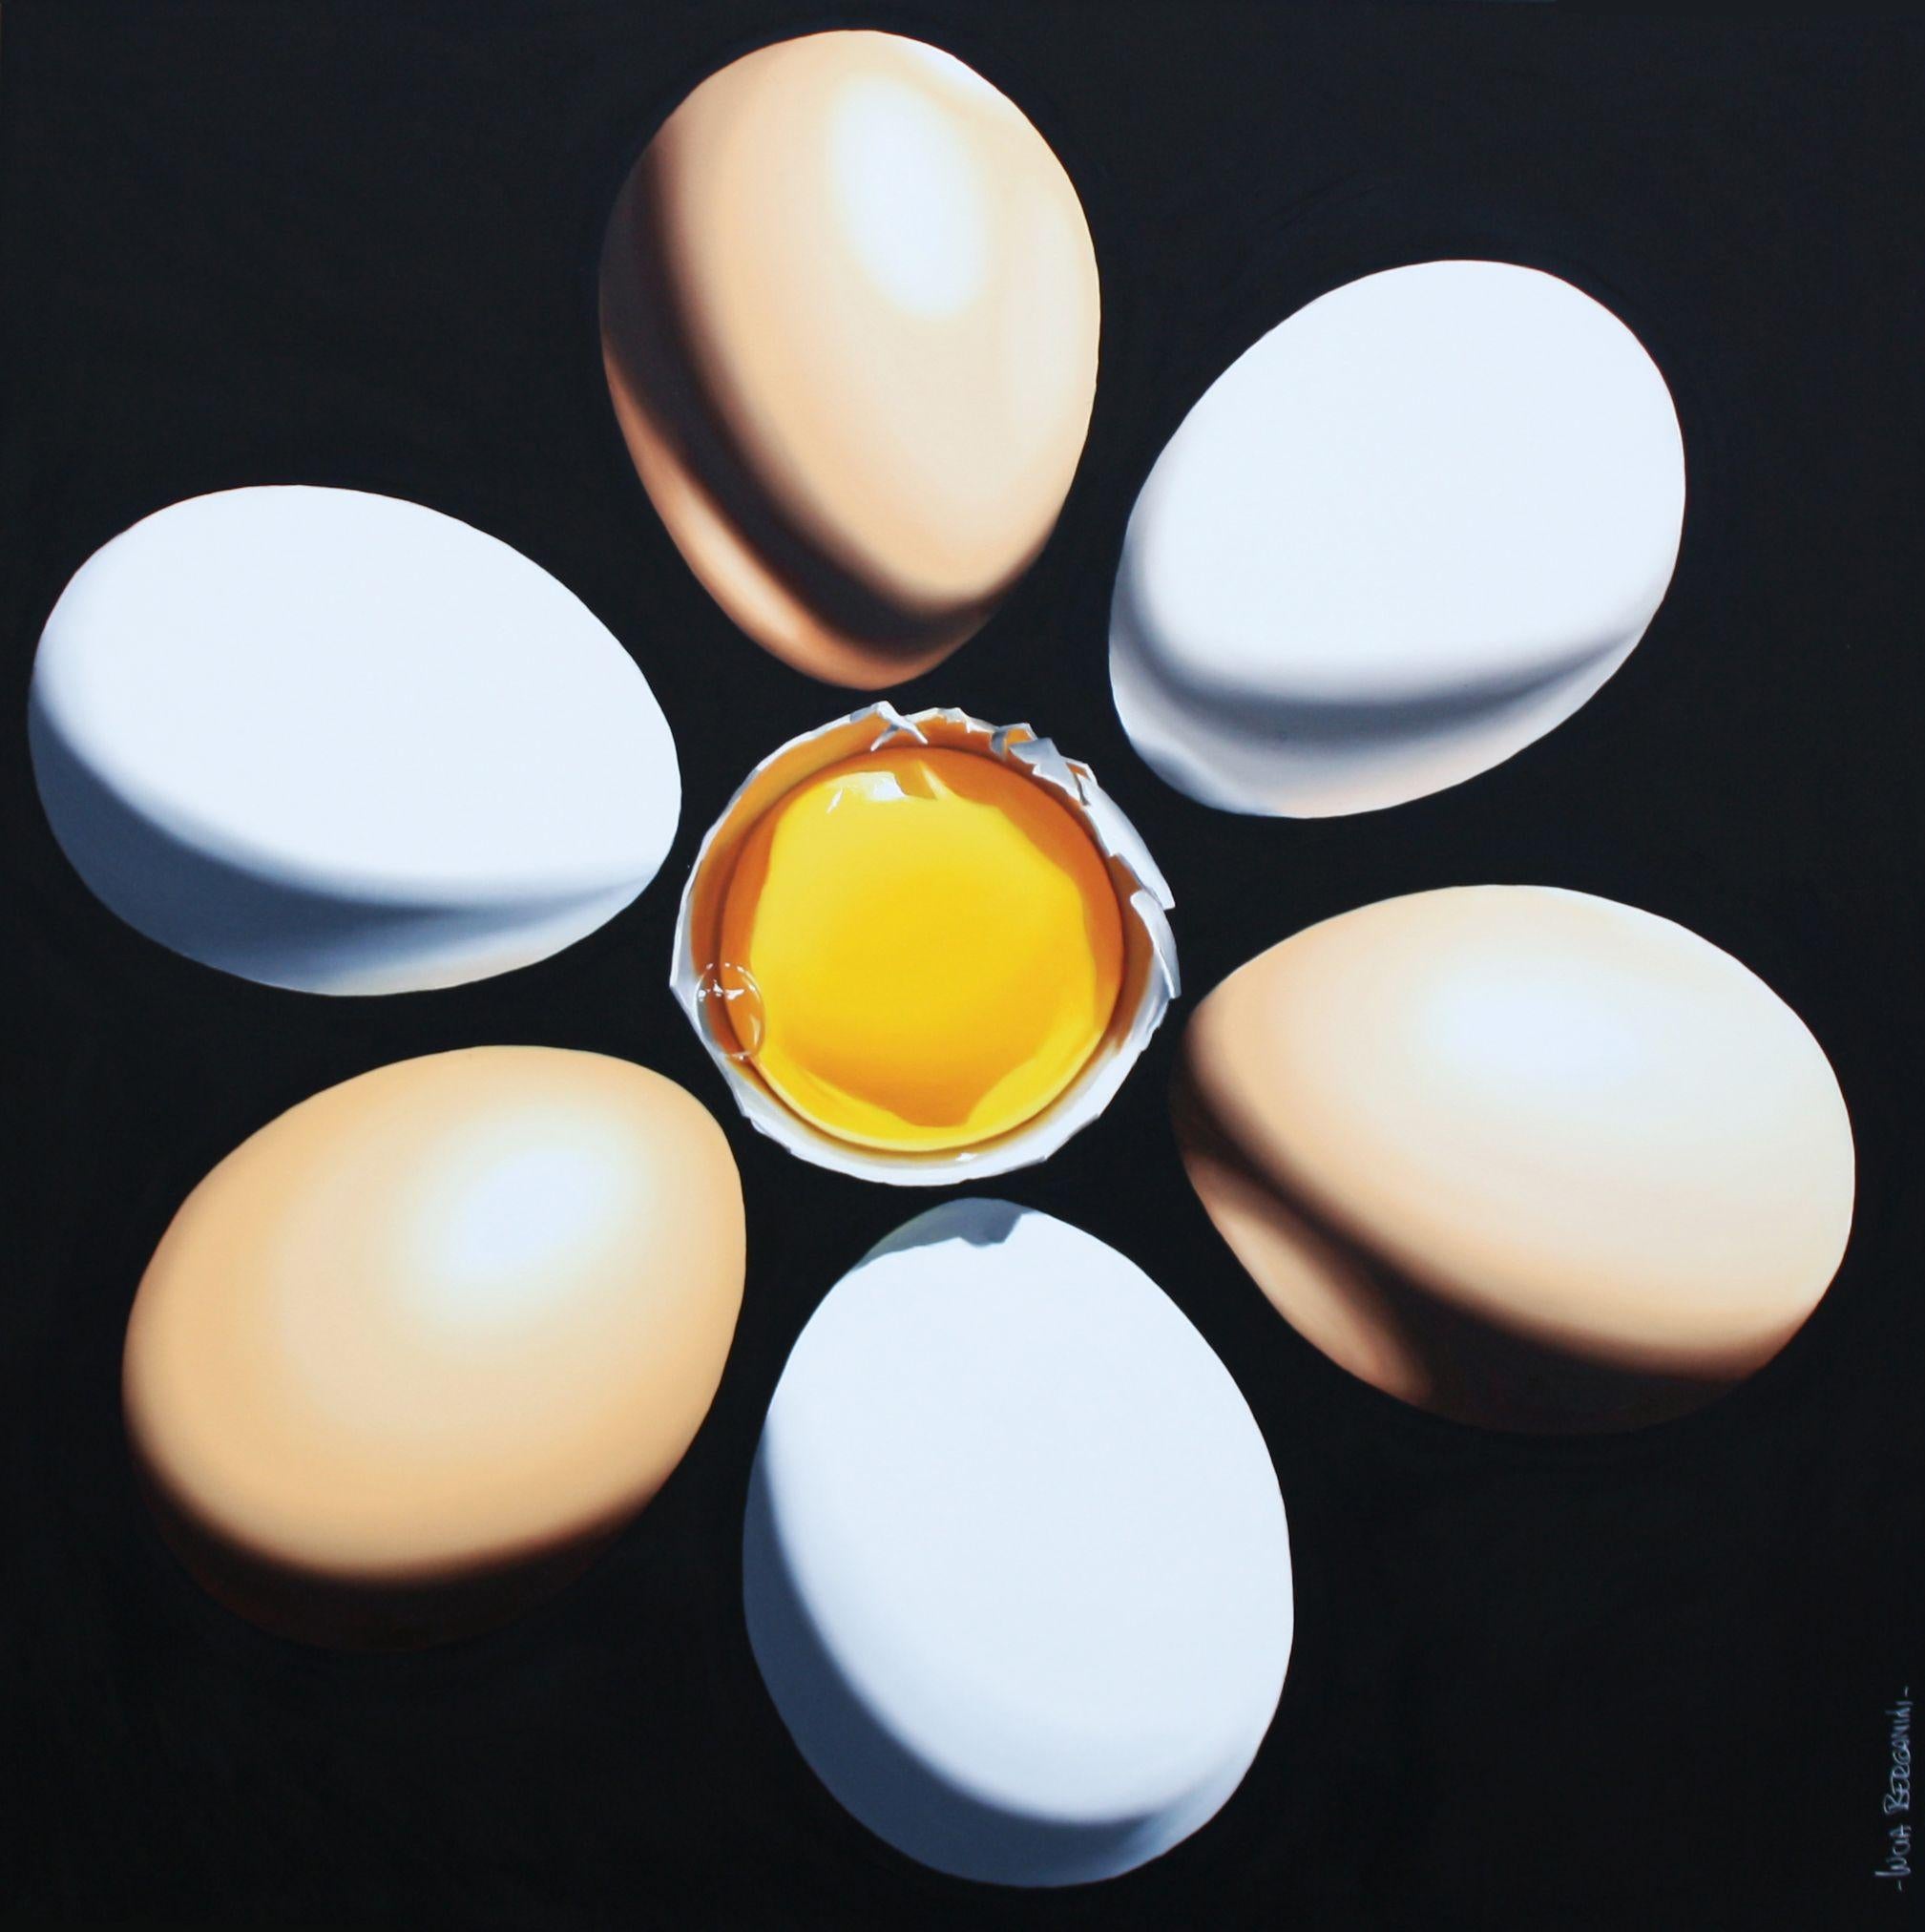 This painting is a sun, when you stay in the same room with its is like to feel the heat as if you take the sun! :: Painting :: Photorealism :: This piece comes with an official certificate of authenticity signed by the artist :: Ready to Hang: Yes